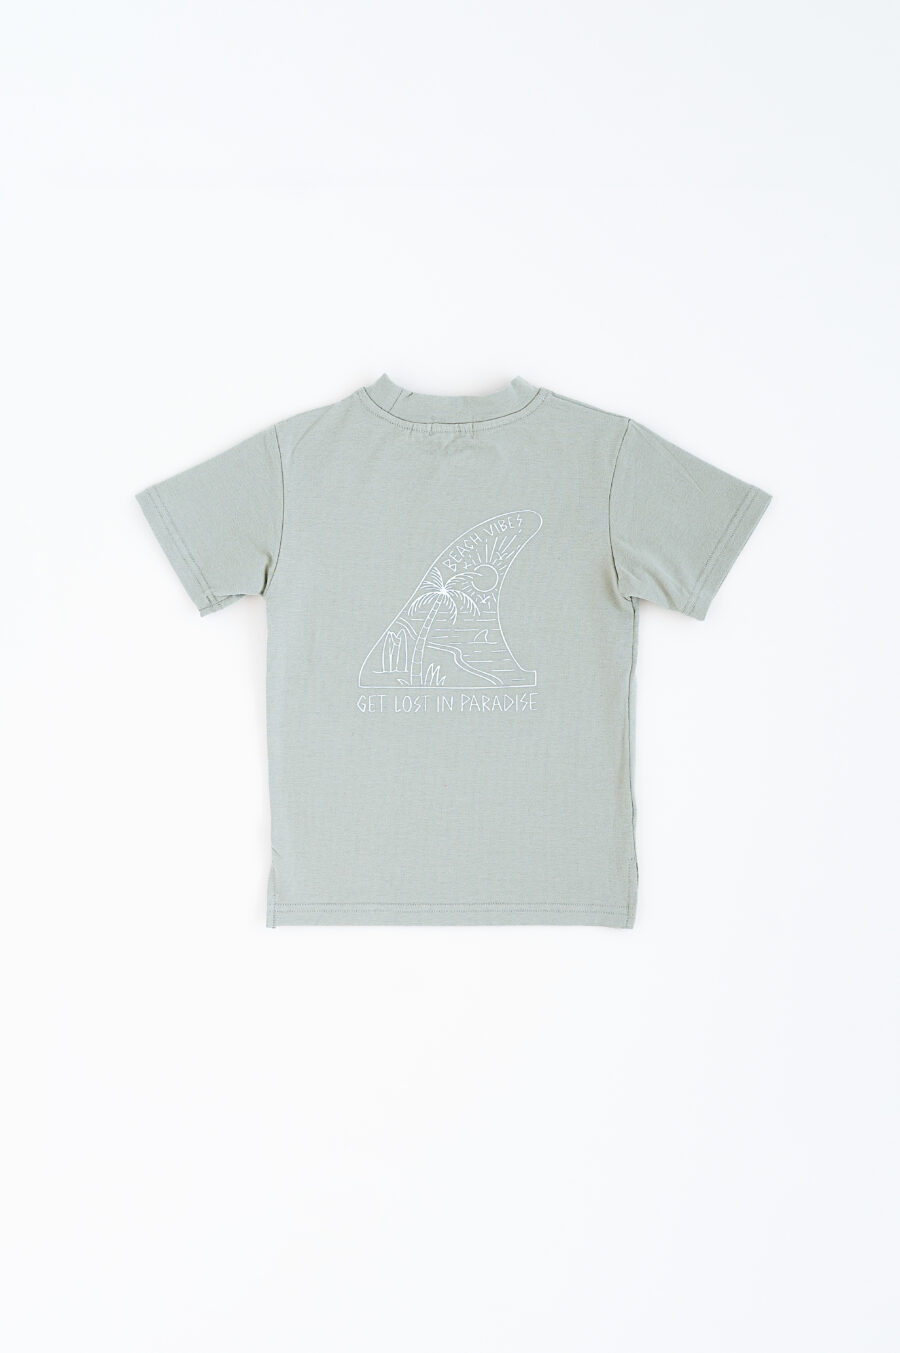 sage green tee by Rad Toddler reads lost in paradise